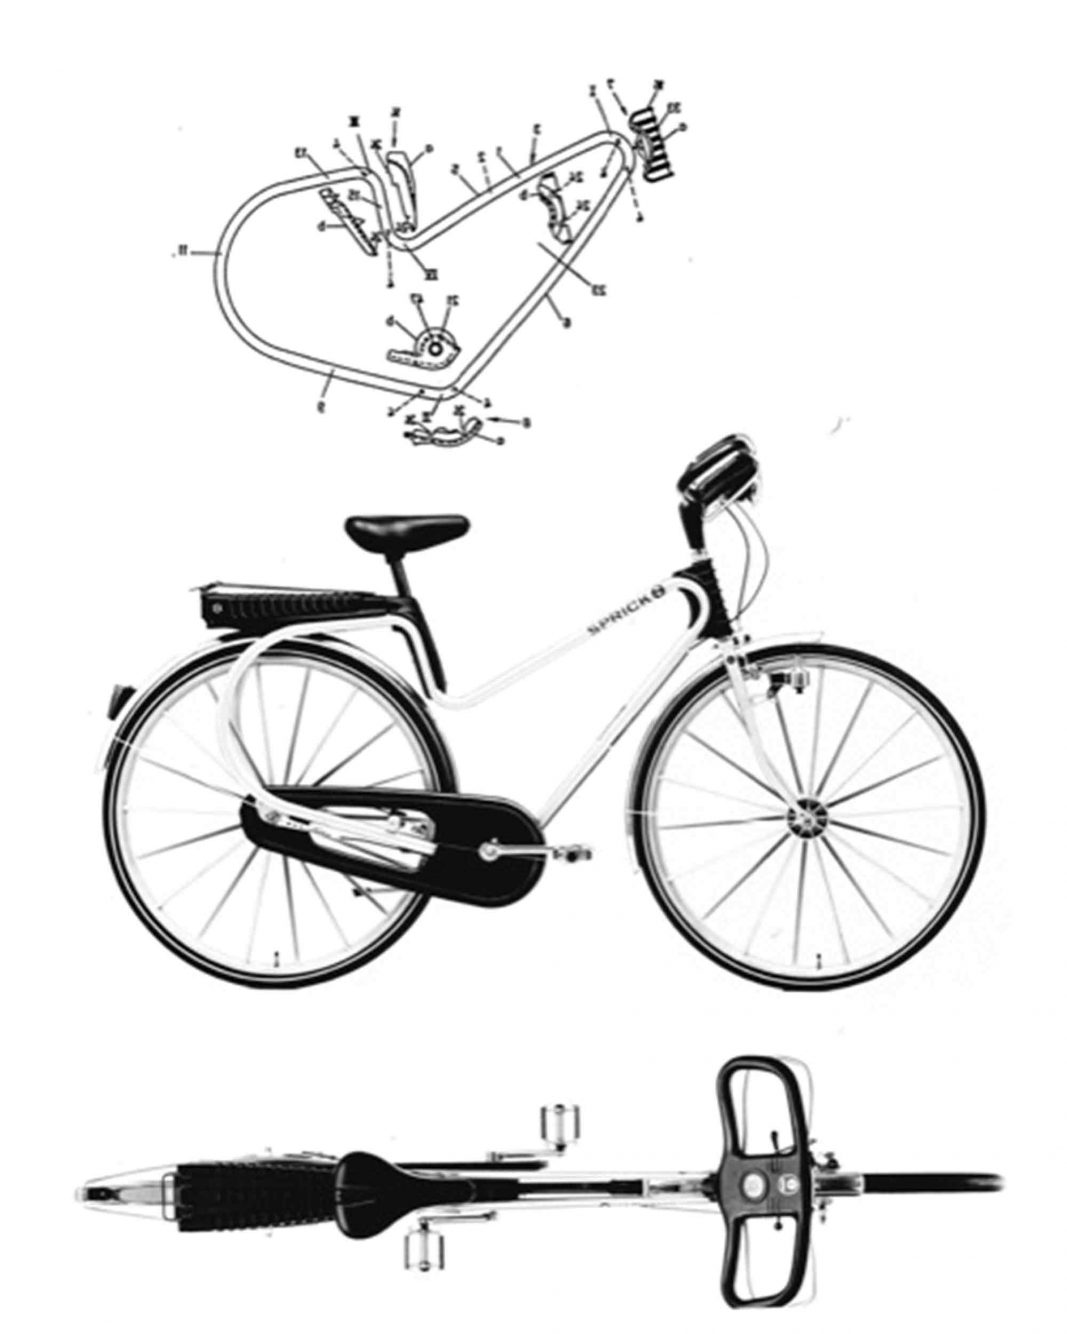 The prototype of the sprick comfortable from 1984 was not yet equipped with tangential spokes at that time.